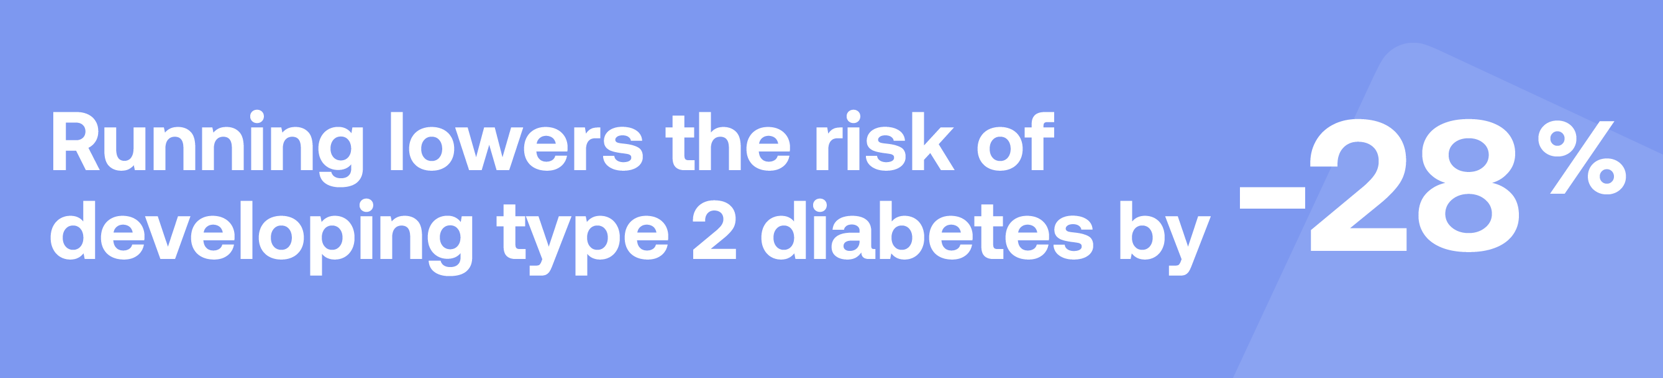 Running lowers the risk of developing type 2 diabetes by -28%